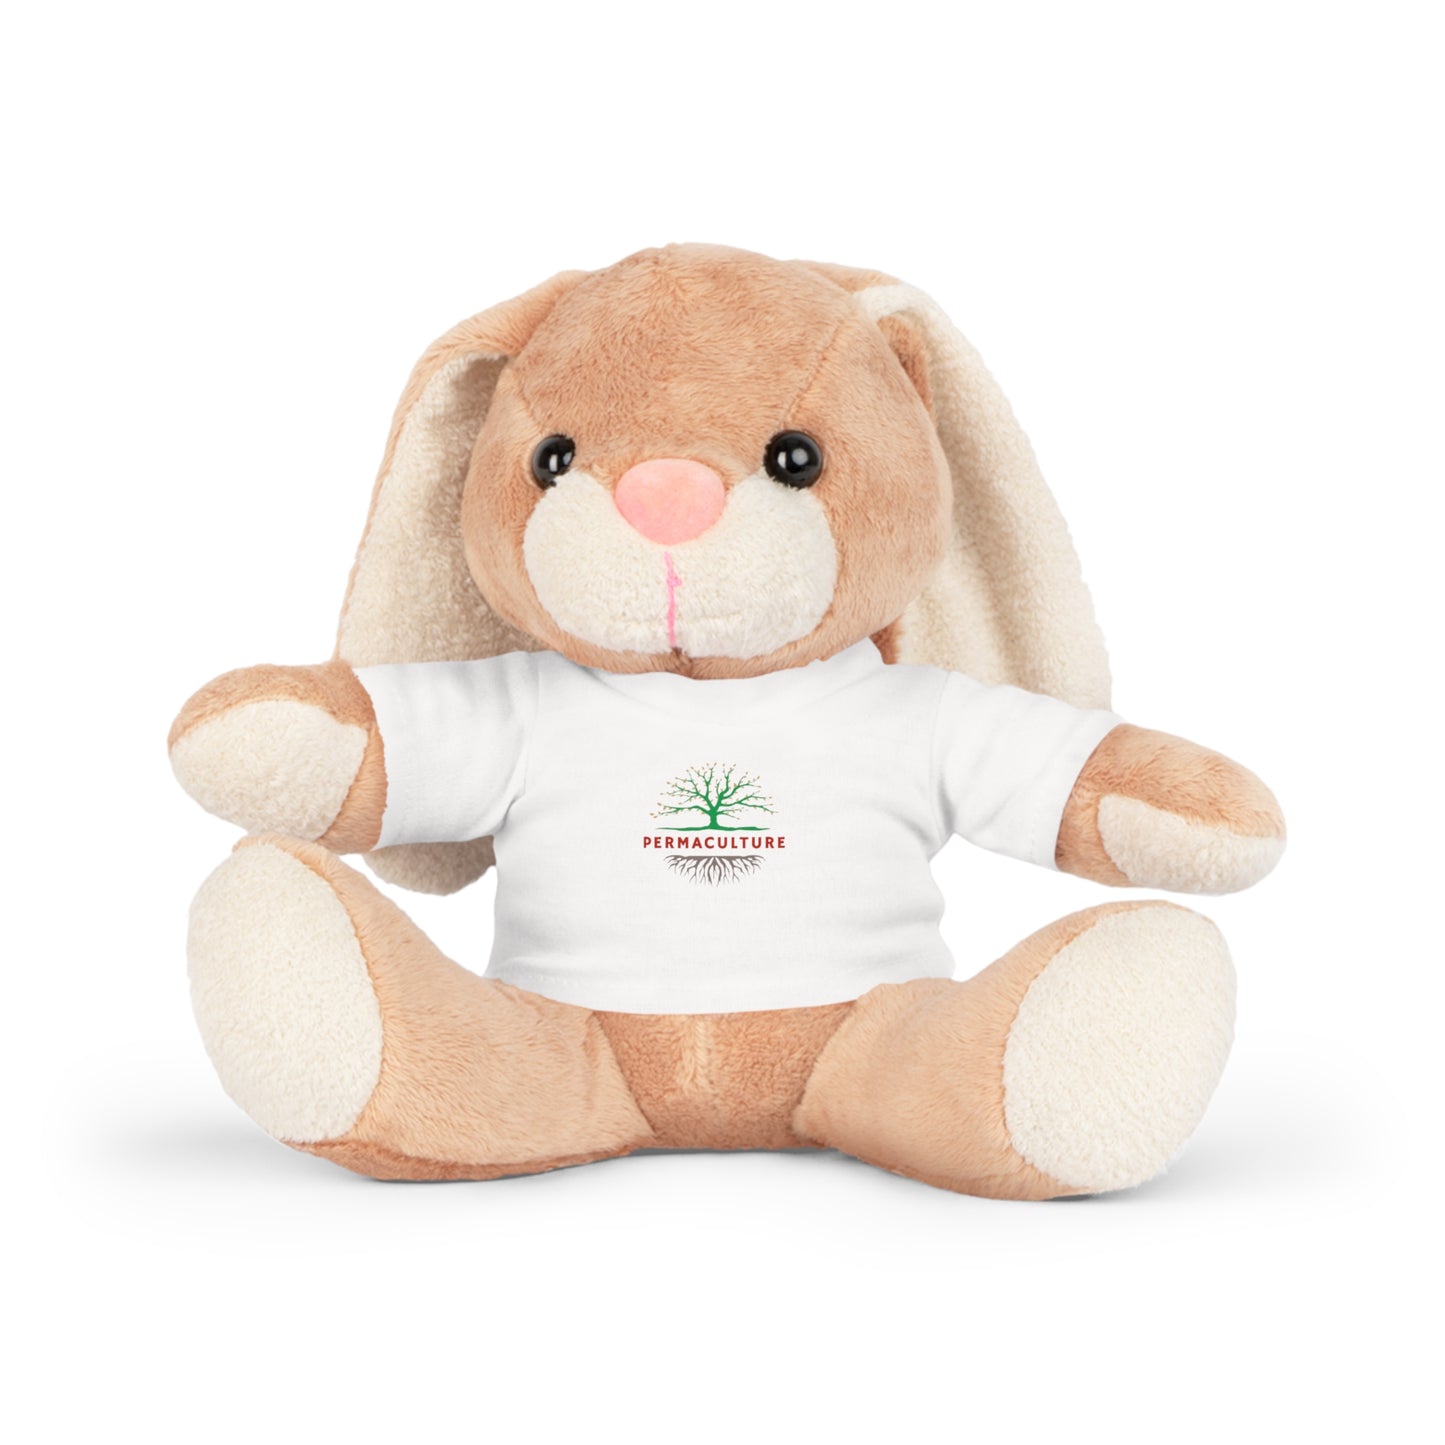 Plush Toy with a Permaculture Shirt